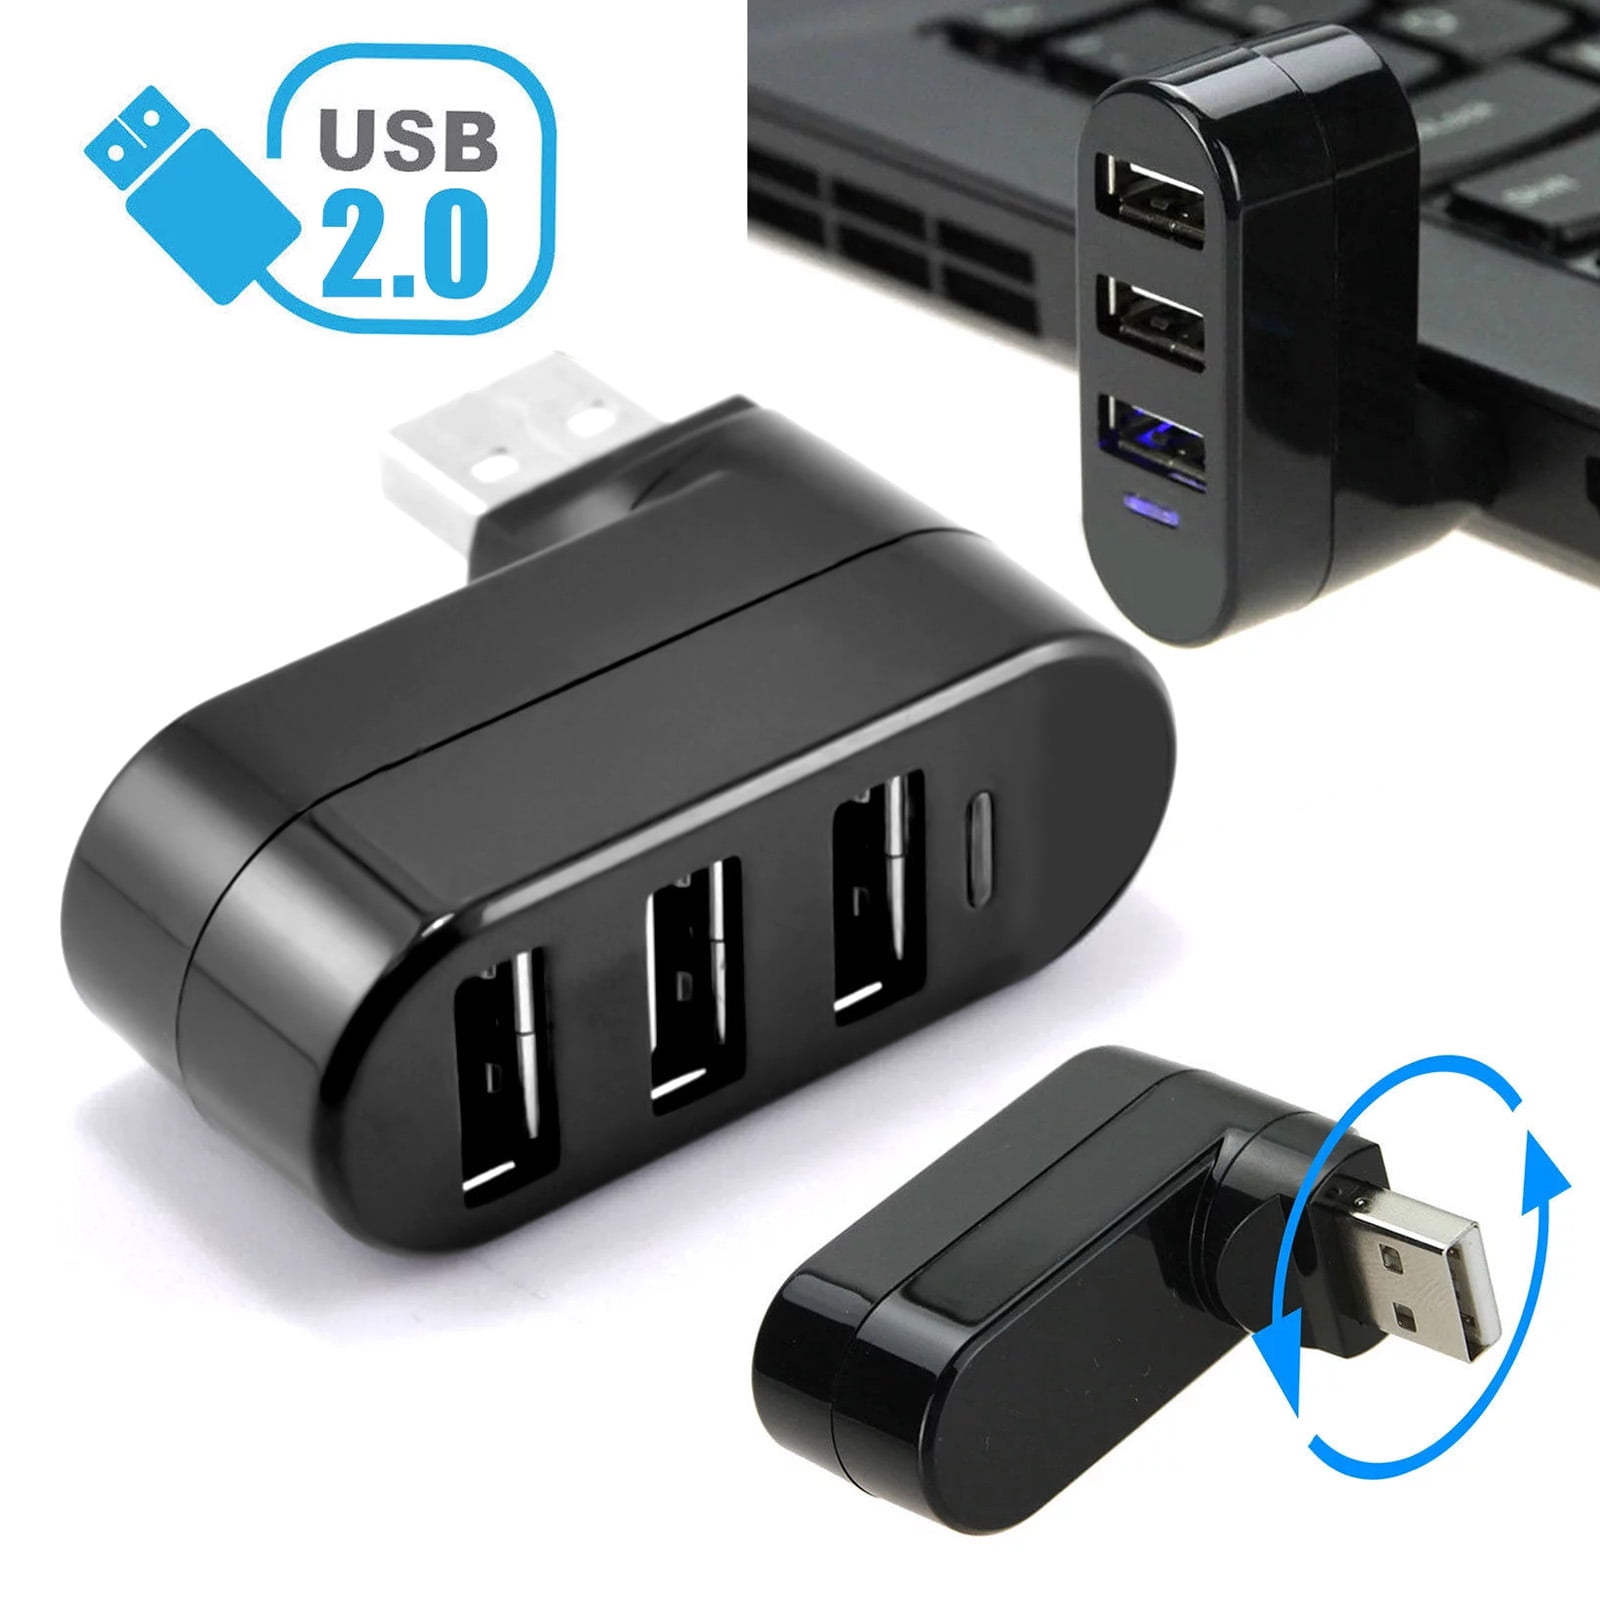 Fnochy Camping Accessories Clearance High Speed USB HUB 4 Port USB 2.0 Port  Portable Aluminum USB Splitter Cable For Laptop PC Tablet